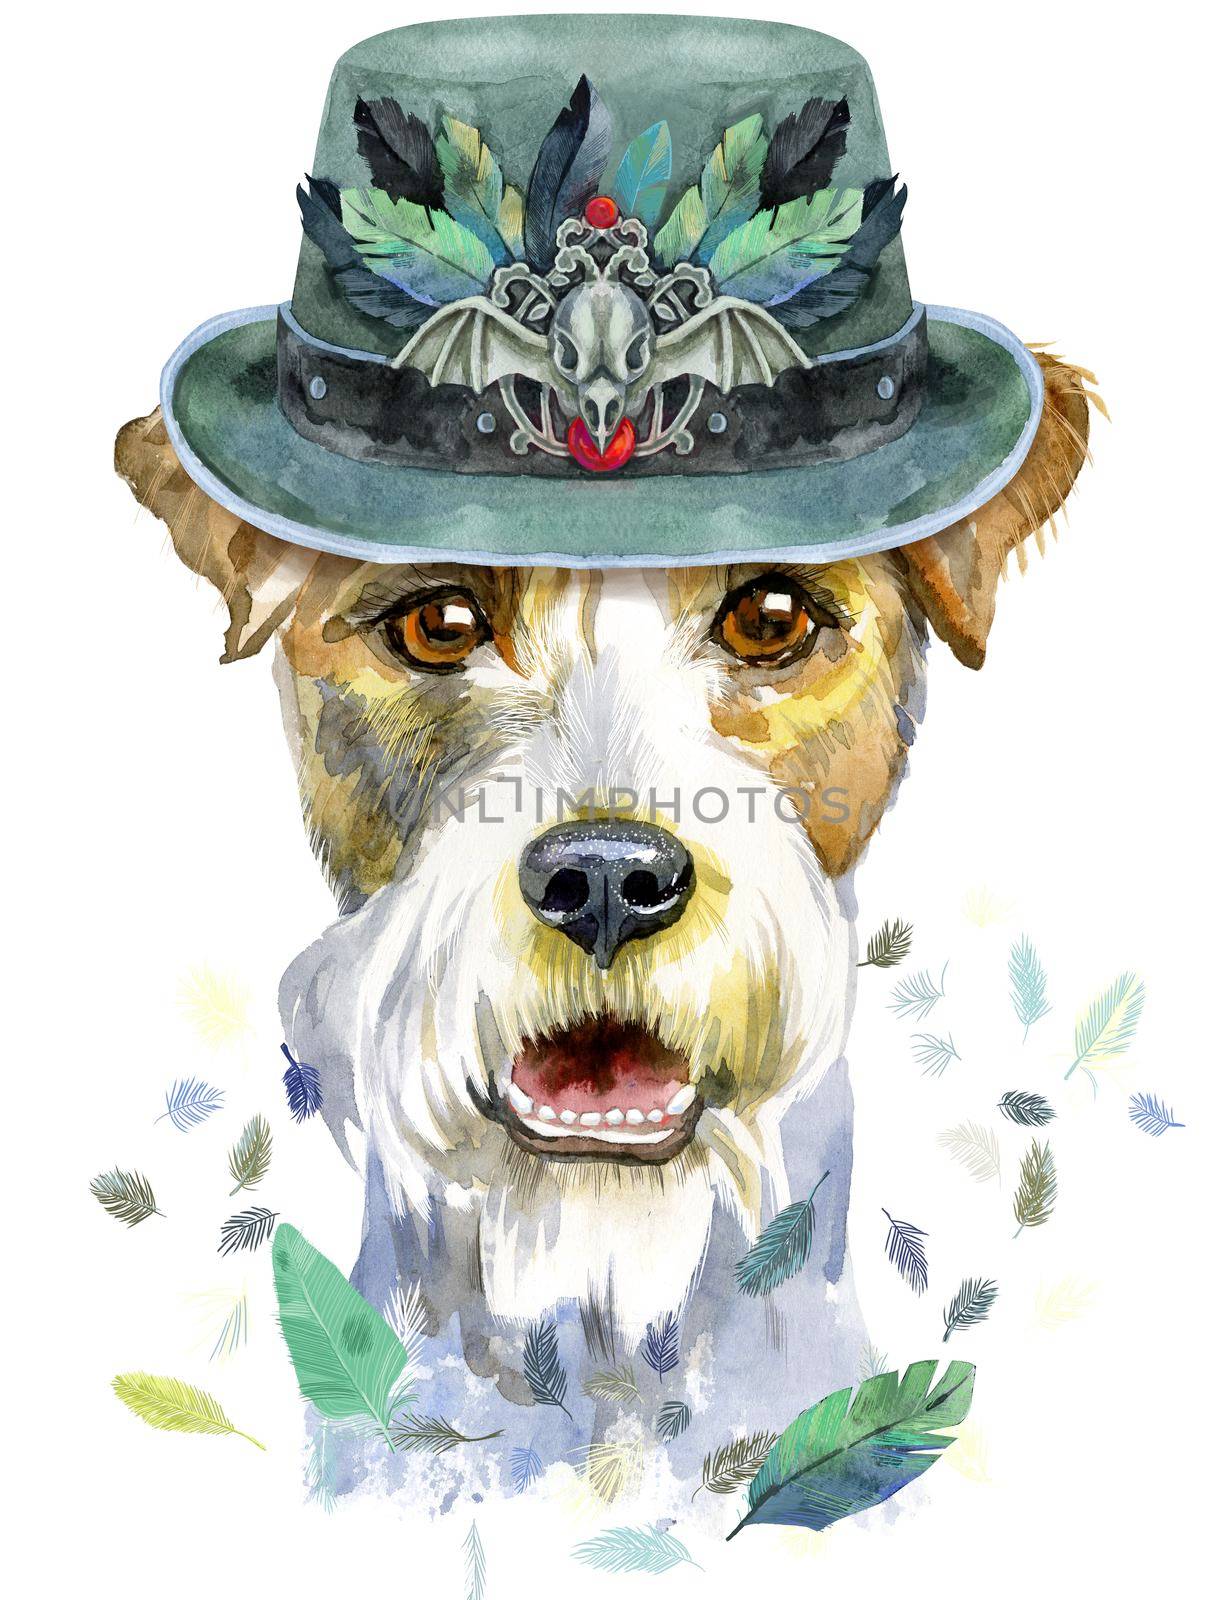 Watercolor portrait of airedale terrier dog in olive hat with raven skull and feathers by NataOmsk